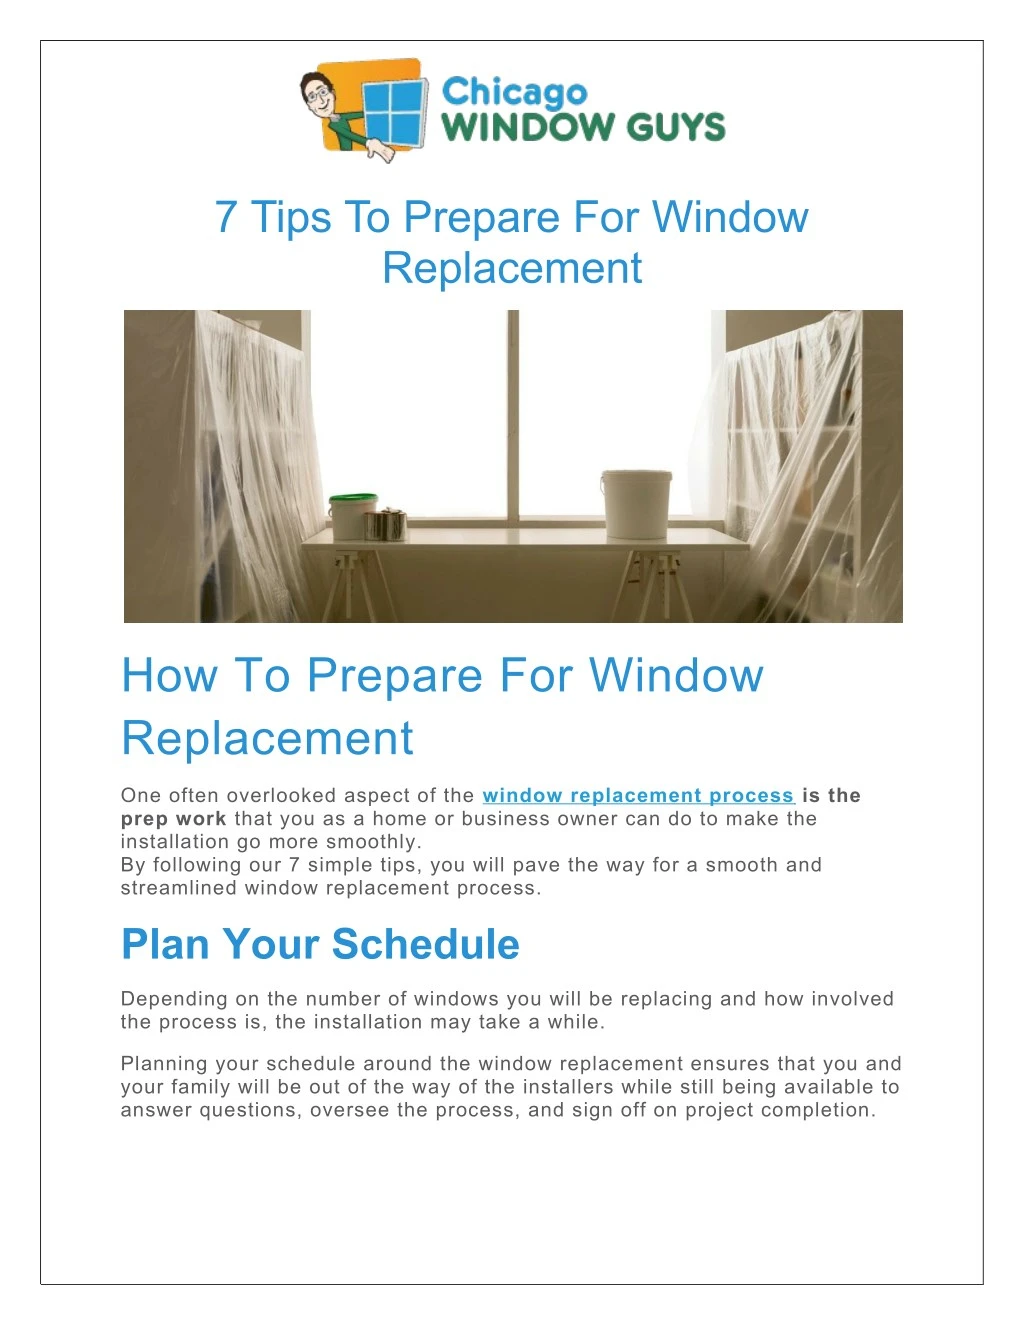 7 tips to prepare for window replacement